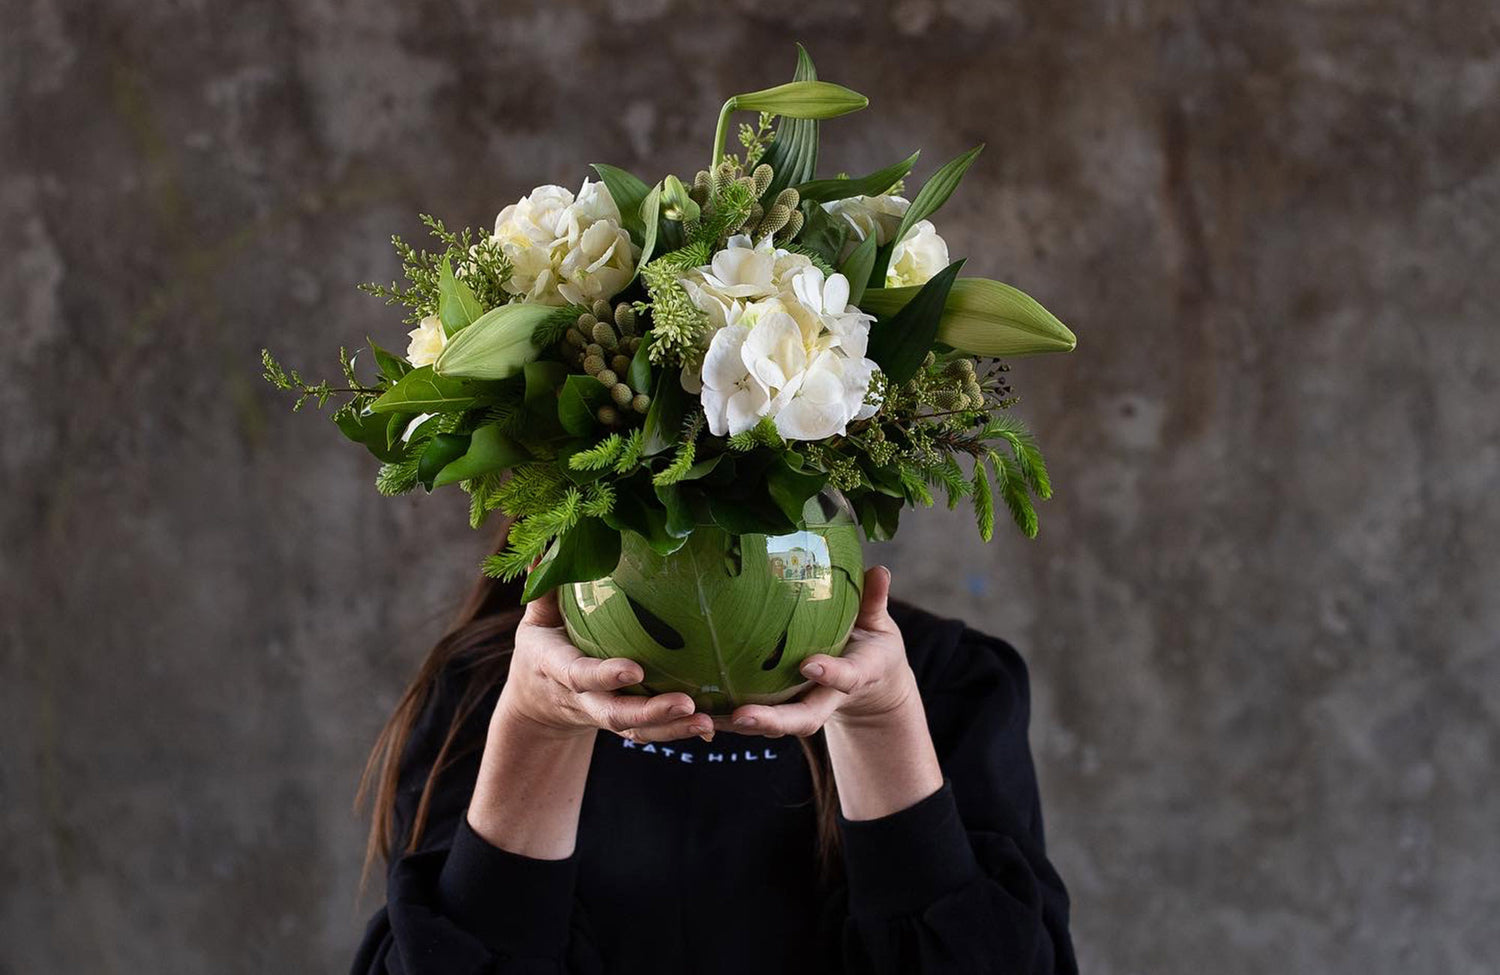 Lady in black holding a Christmas flower delivery arrangement in a glass vase